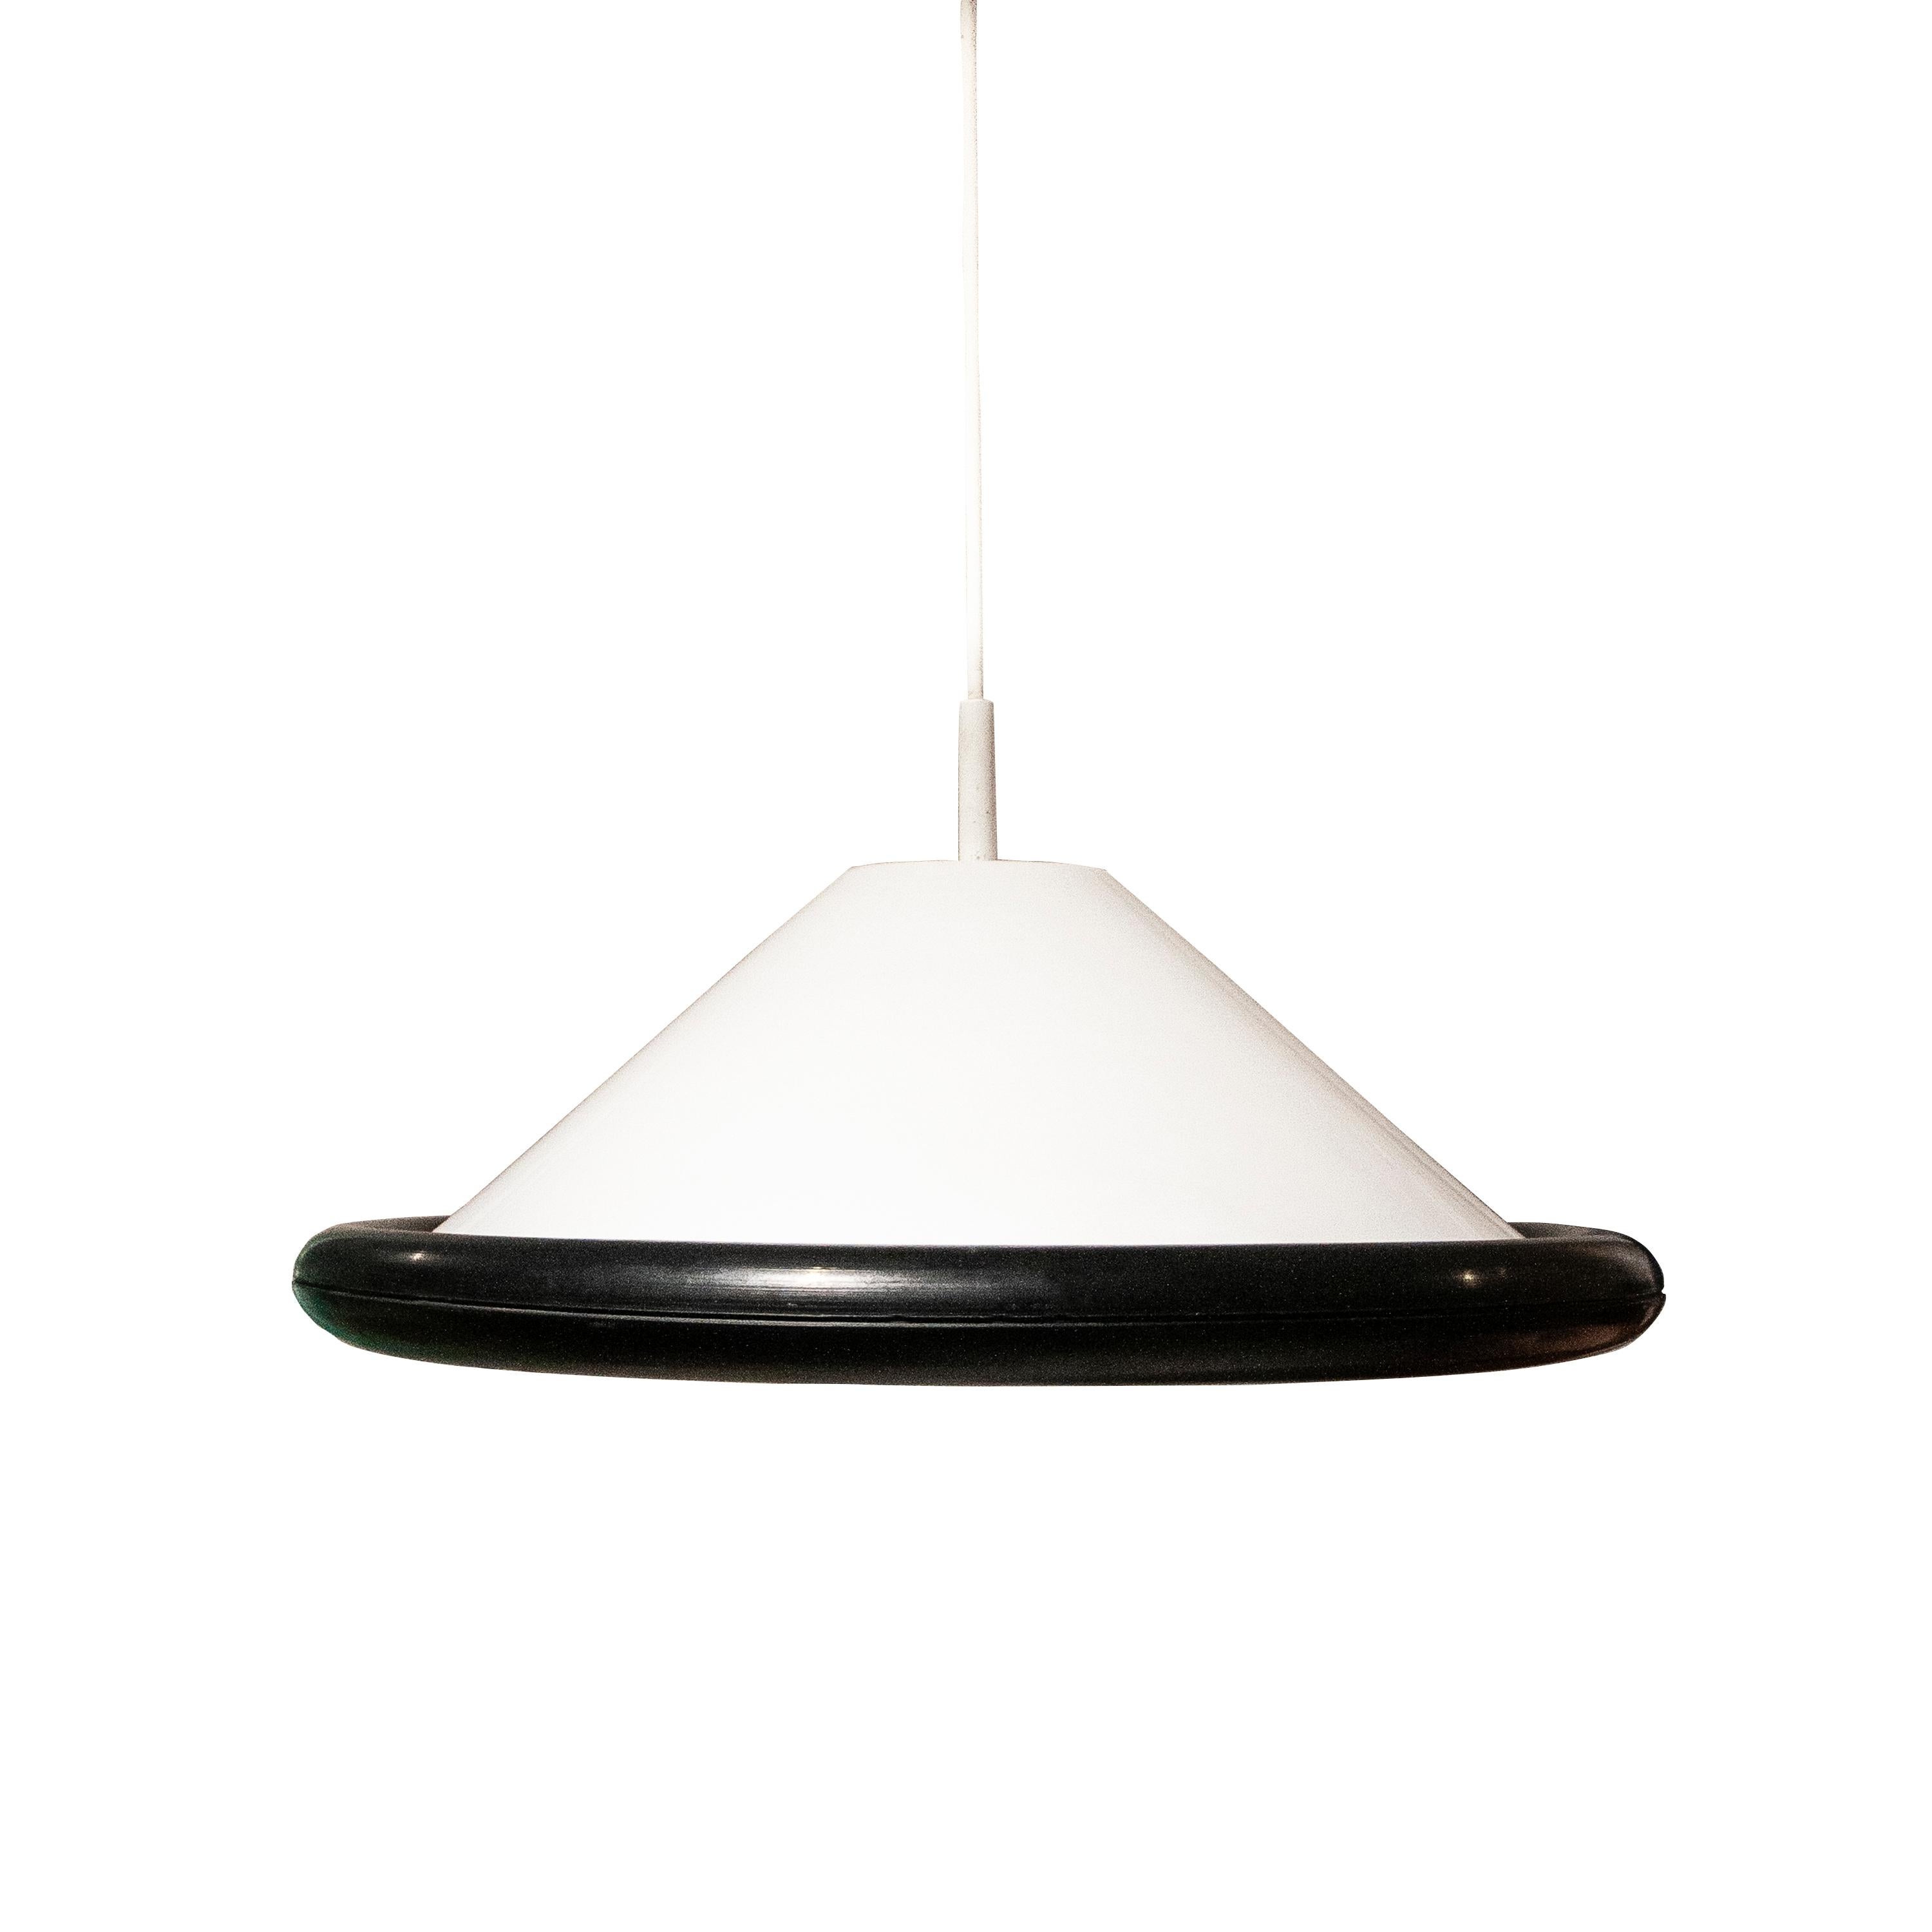 White Memphis-Style pendant lamp. The lamp is composed of a semi translucent conic top and the opaque base, with geometry of superimposed concentric circles, is made of white lacquered metal. The edge and the cup are made of flexible black rubber.